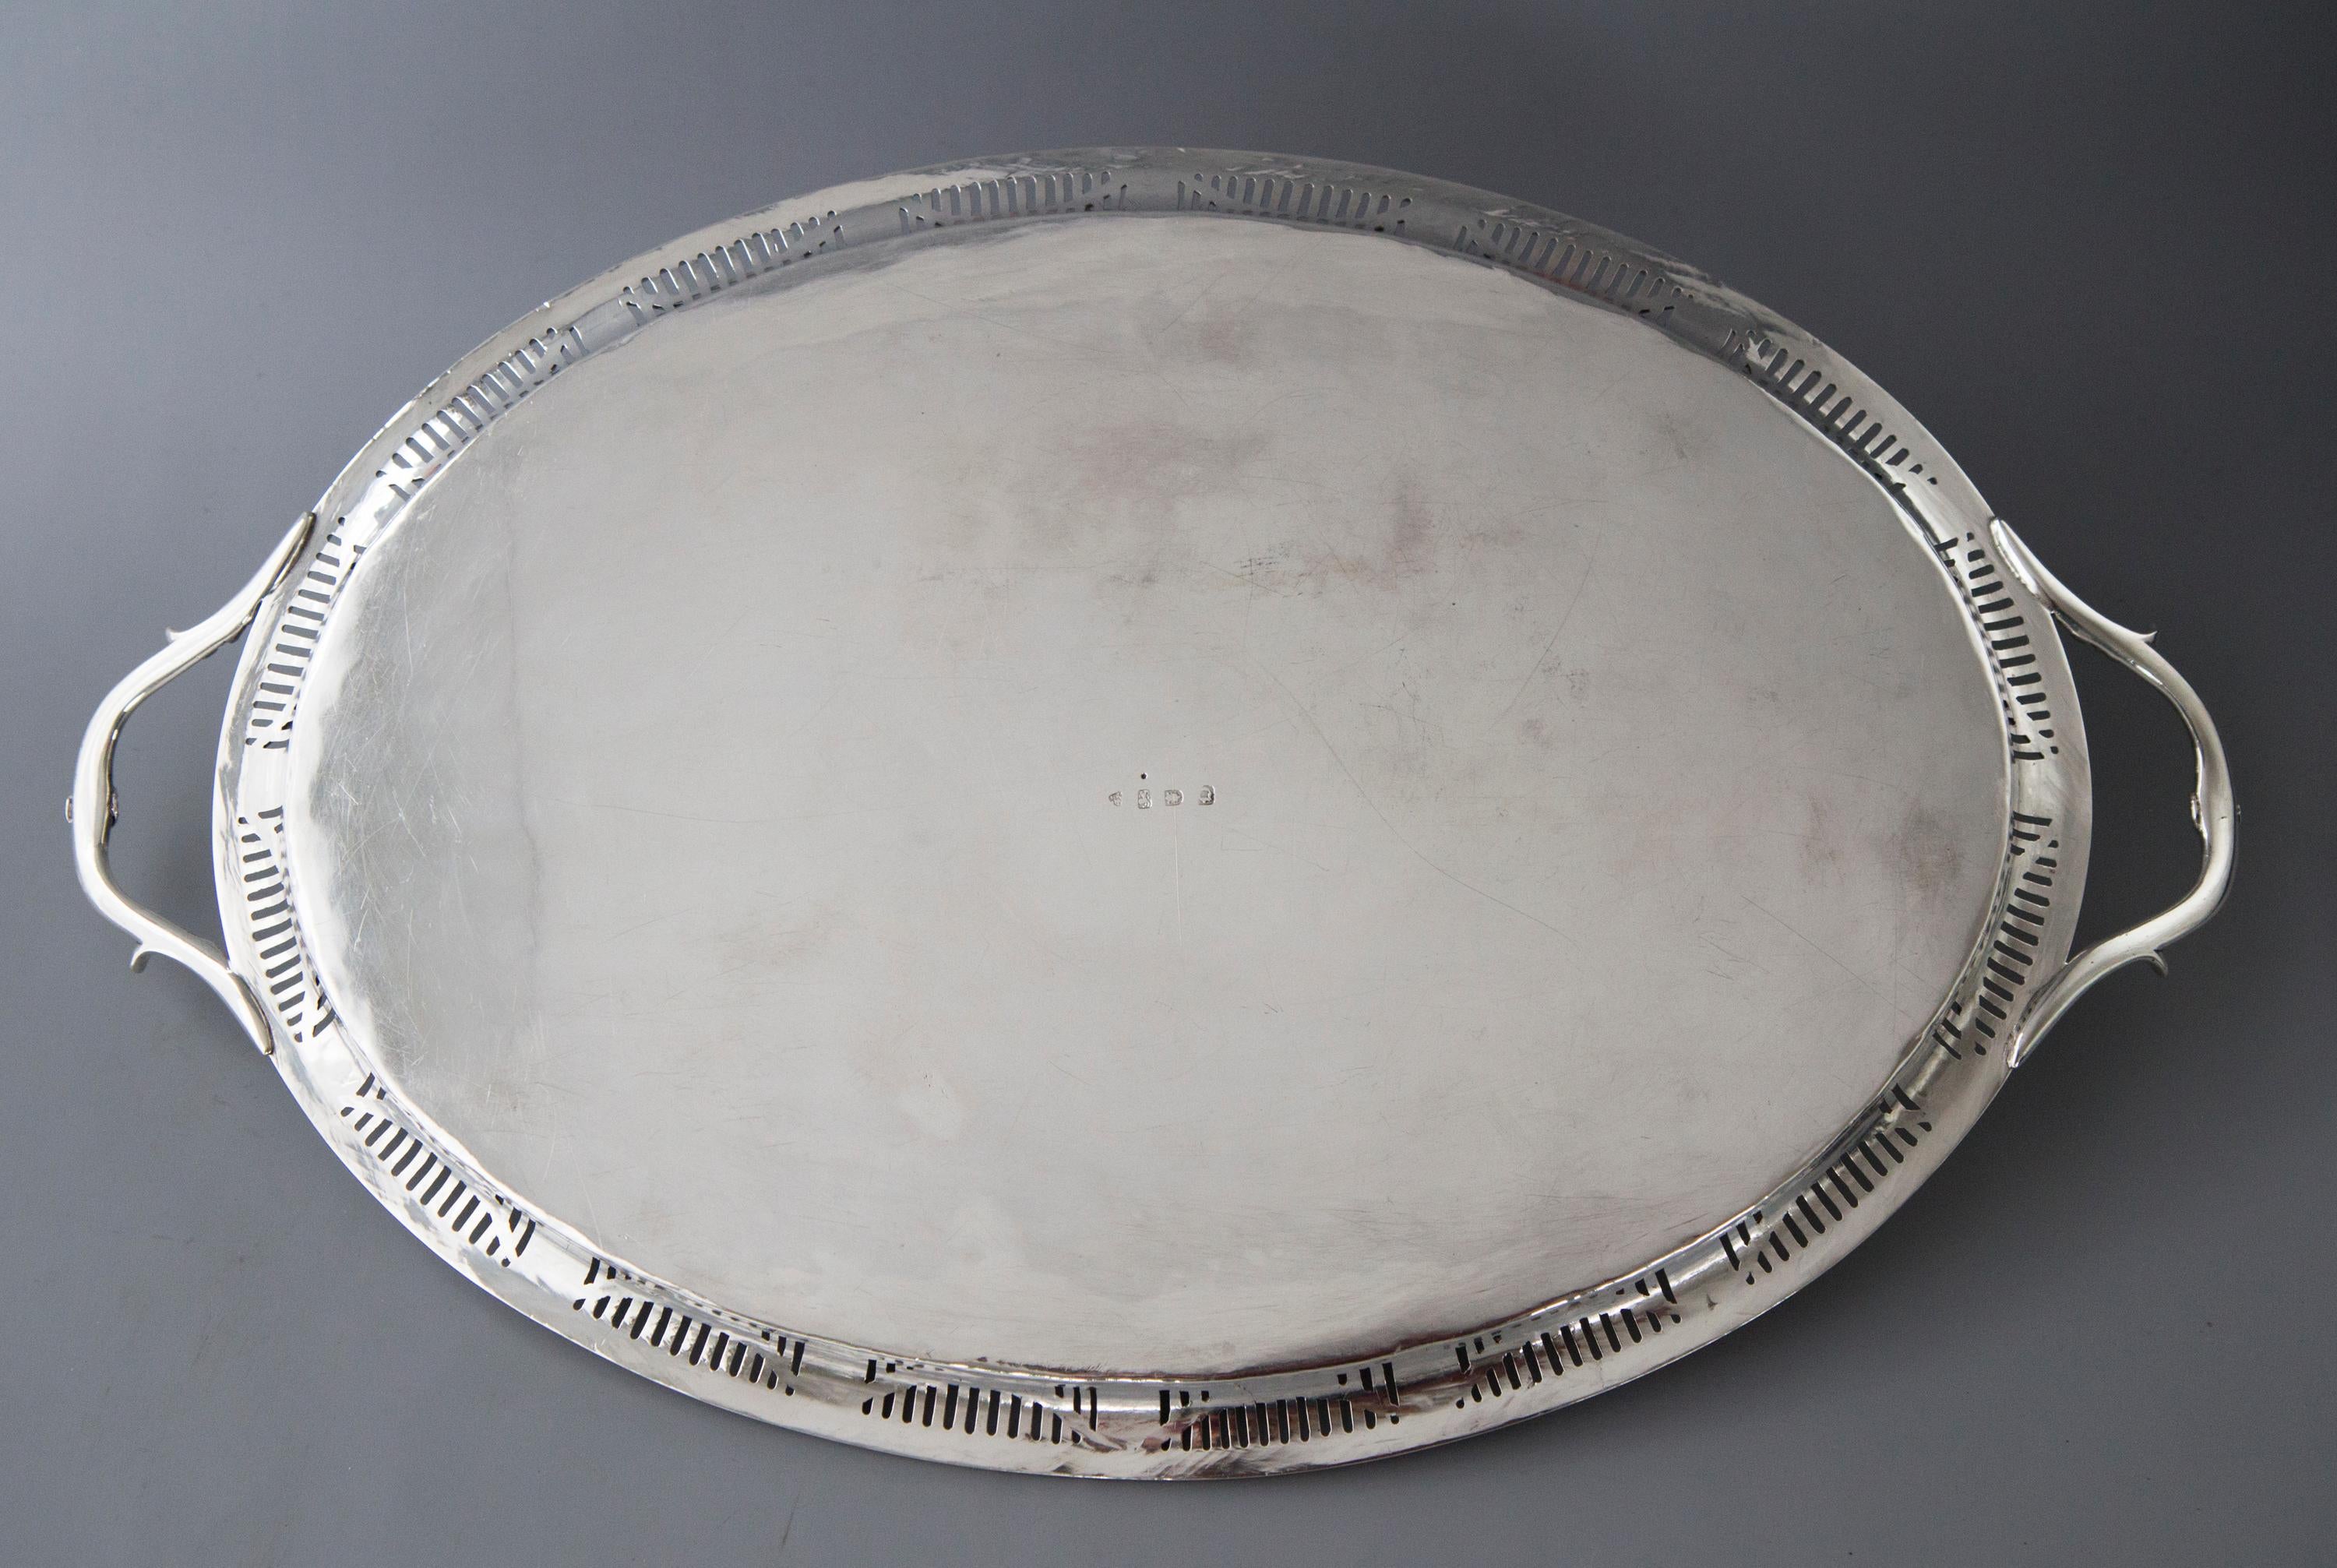 A very fine quality George III oval silver tray with pierced gallery and beaded edges with floral swag and urn classical decoration.

Clearly hallmarked to the underside for London 1769 by Thomas Heming.

This is an exceptionally fine tray by